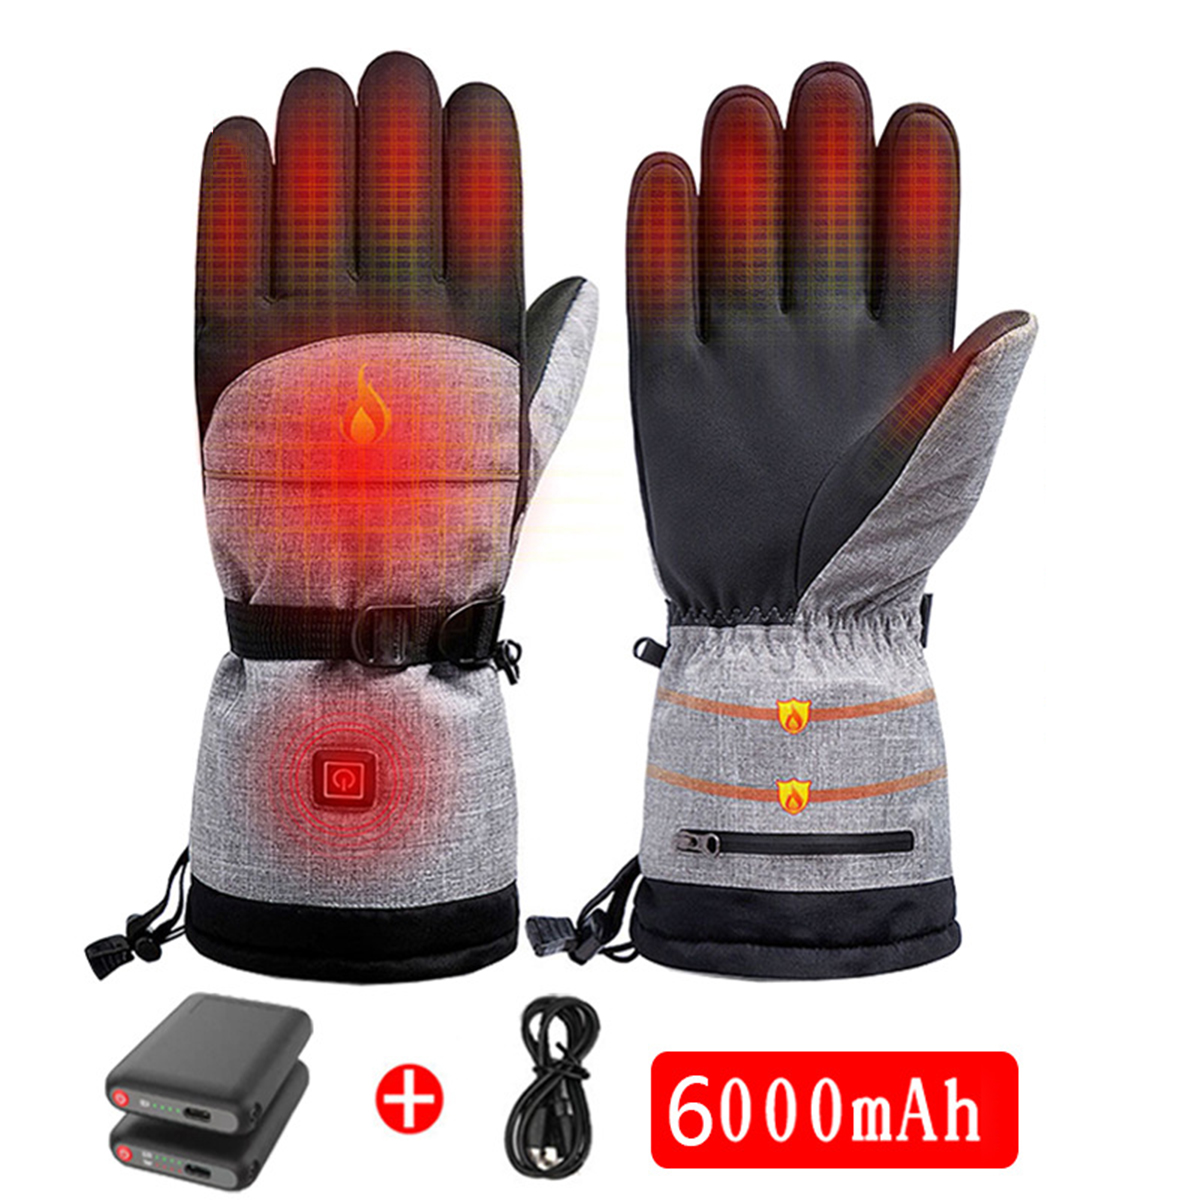 Gloves with 6000mAh batteries